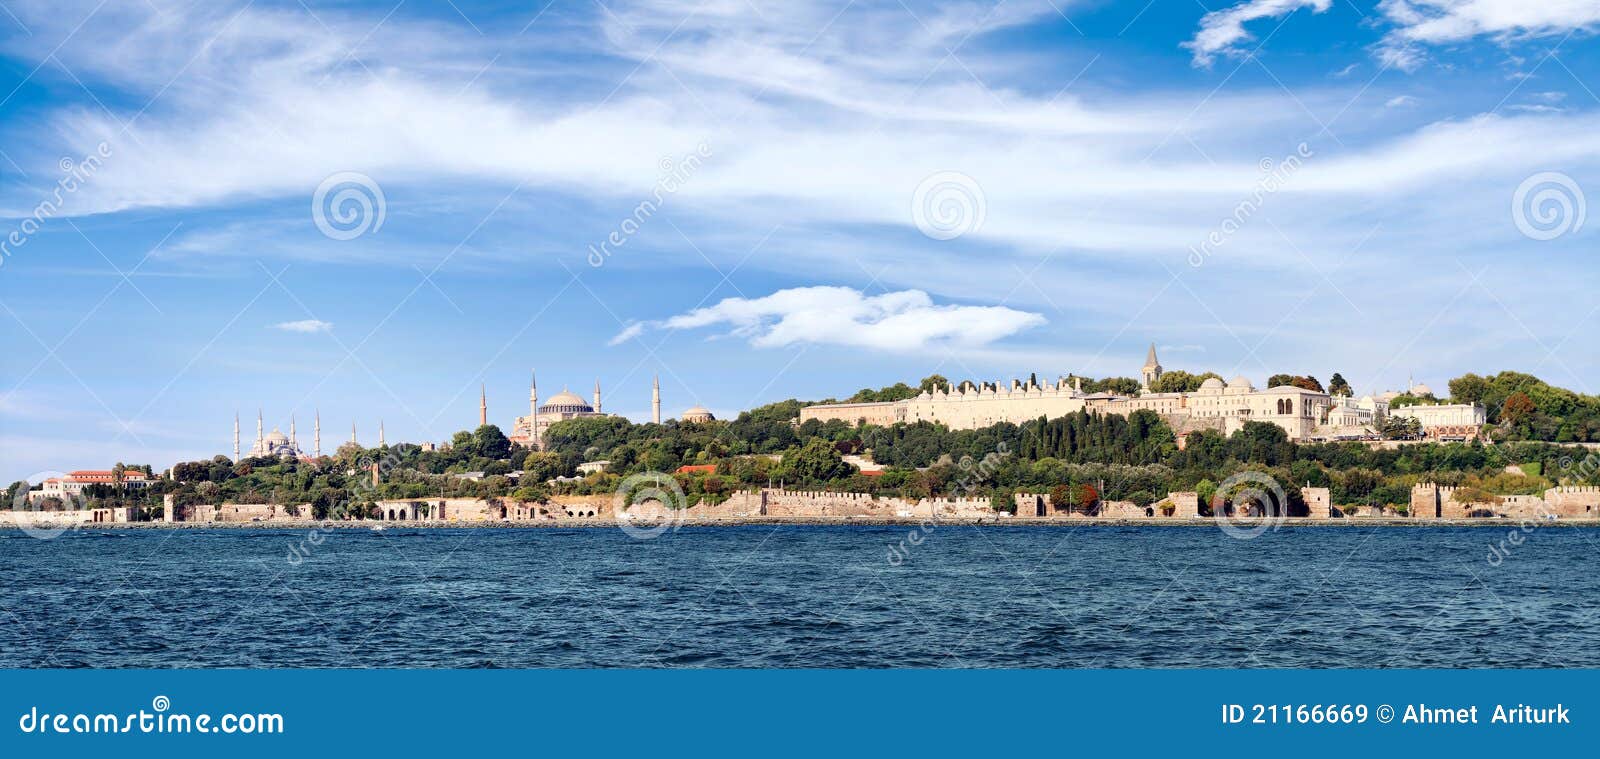 istanbul in panoramic view